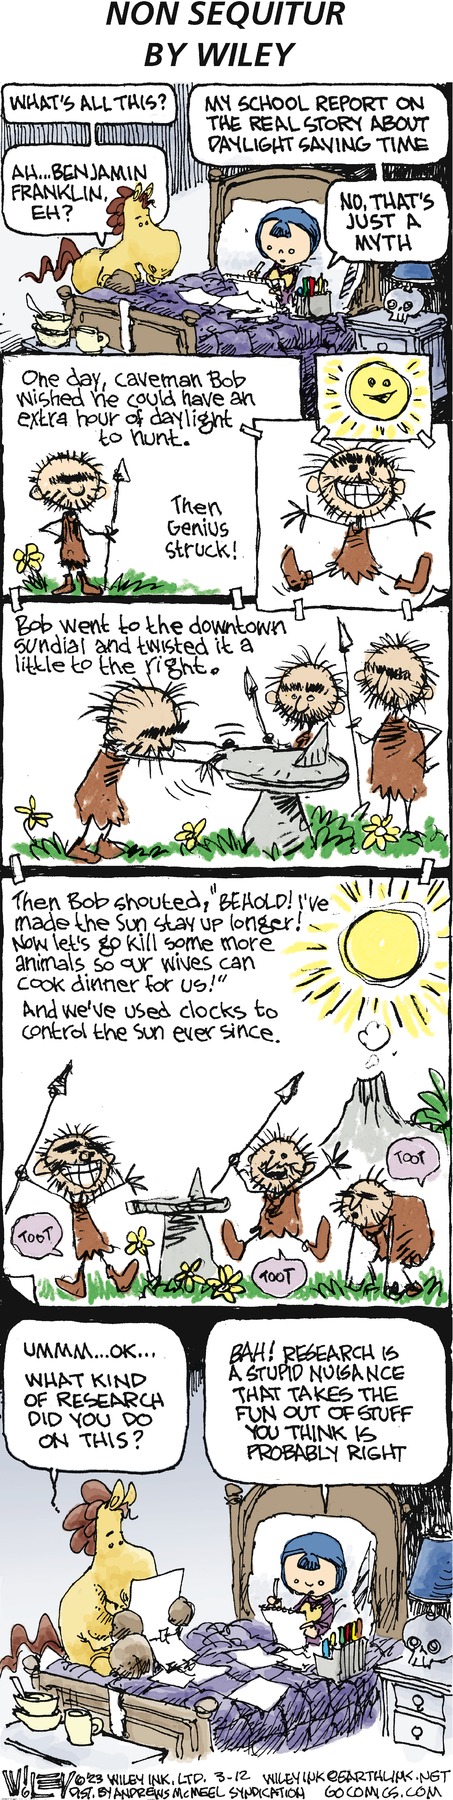 Non Sequitur Comic Strip for March 12, 2023 